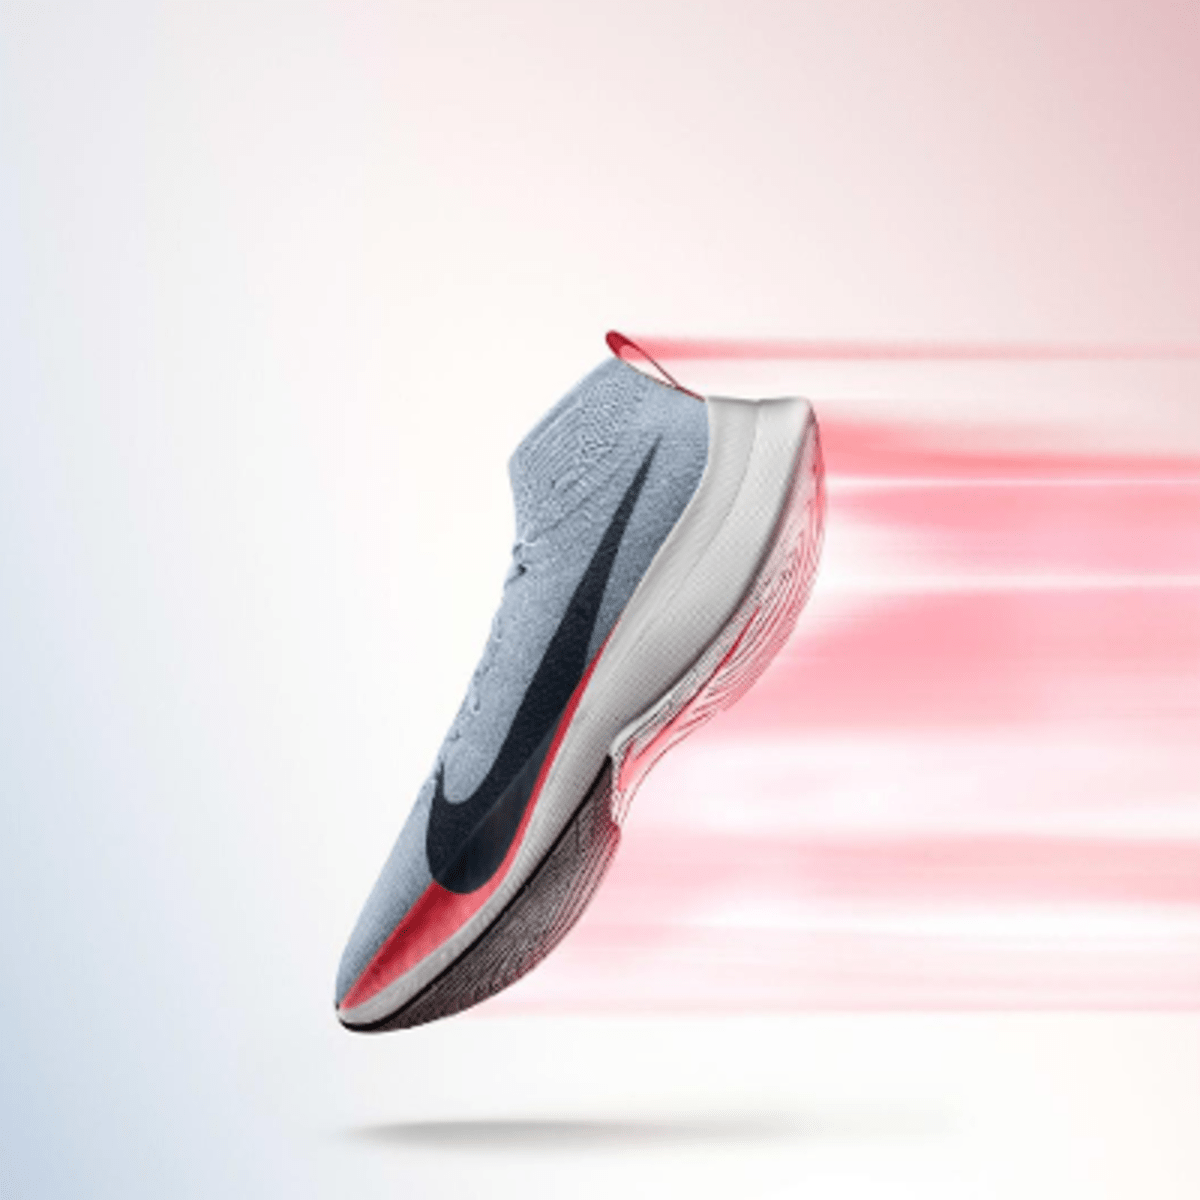 vaporfly banned